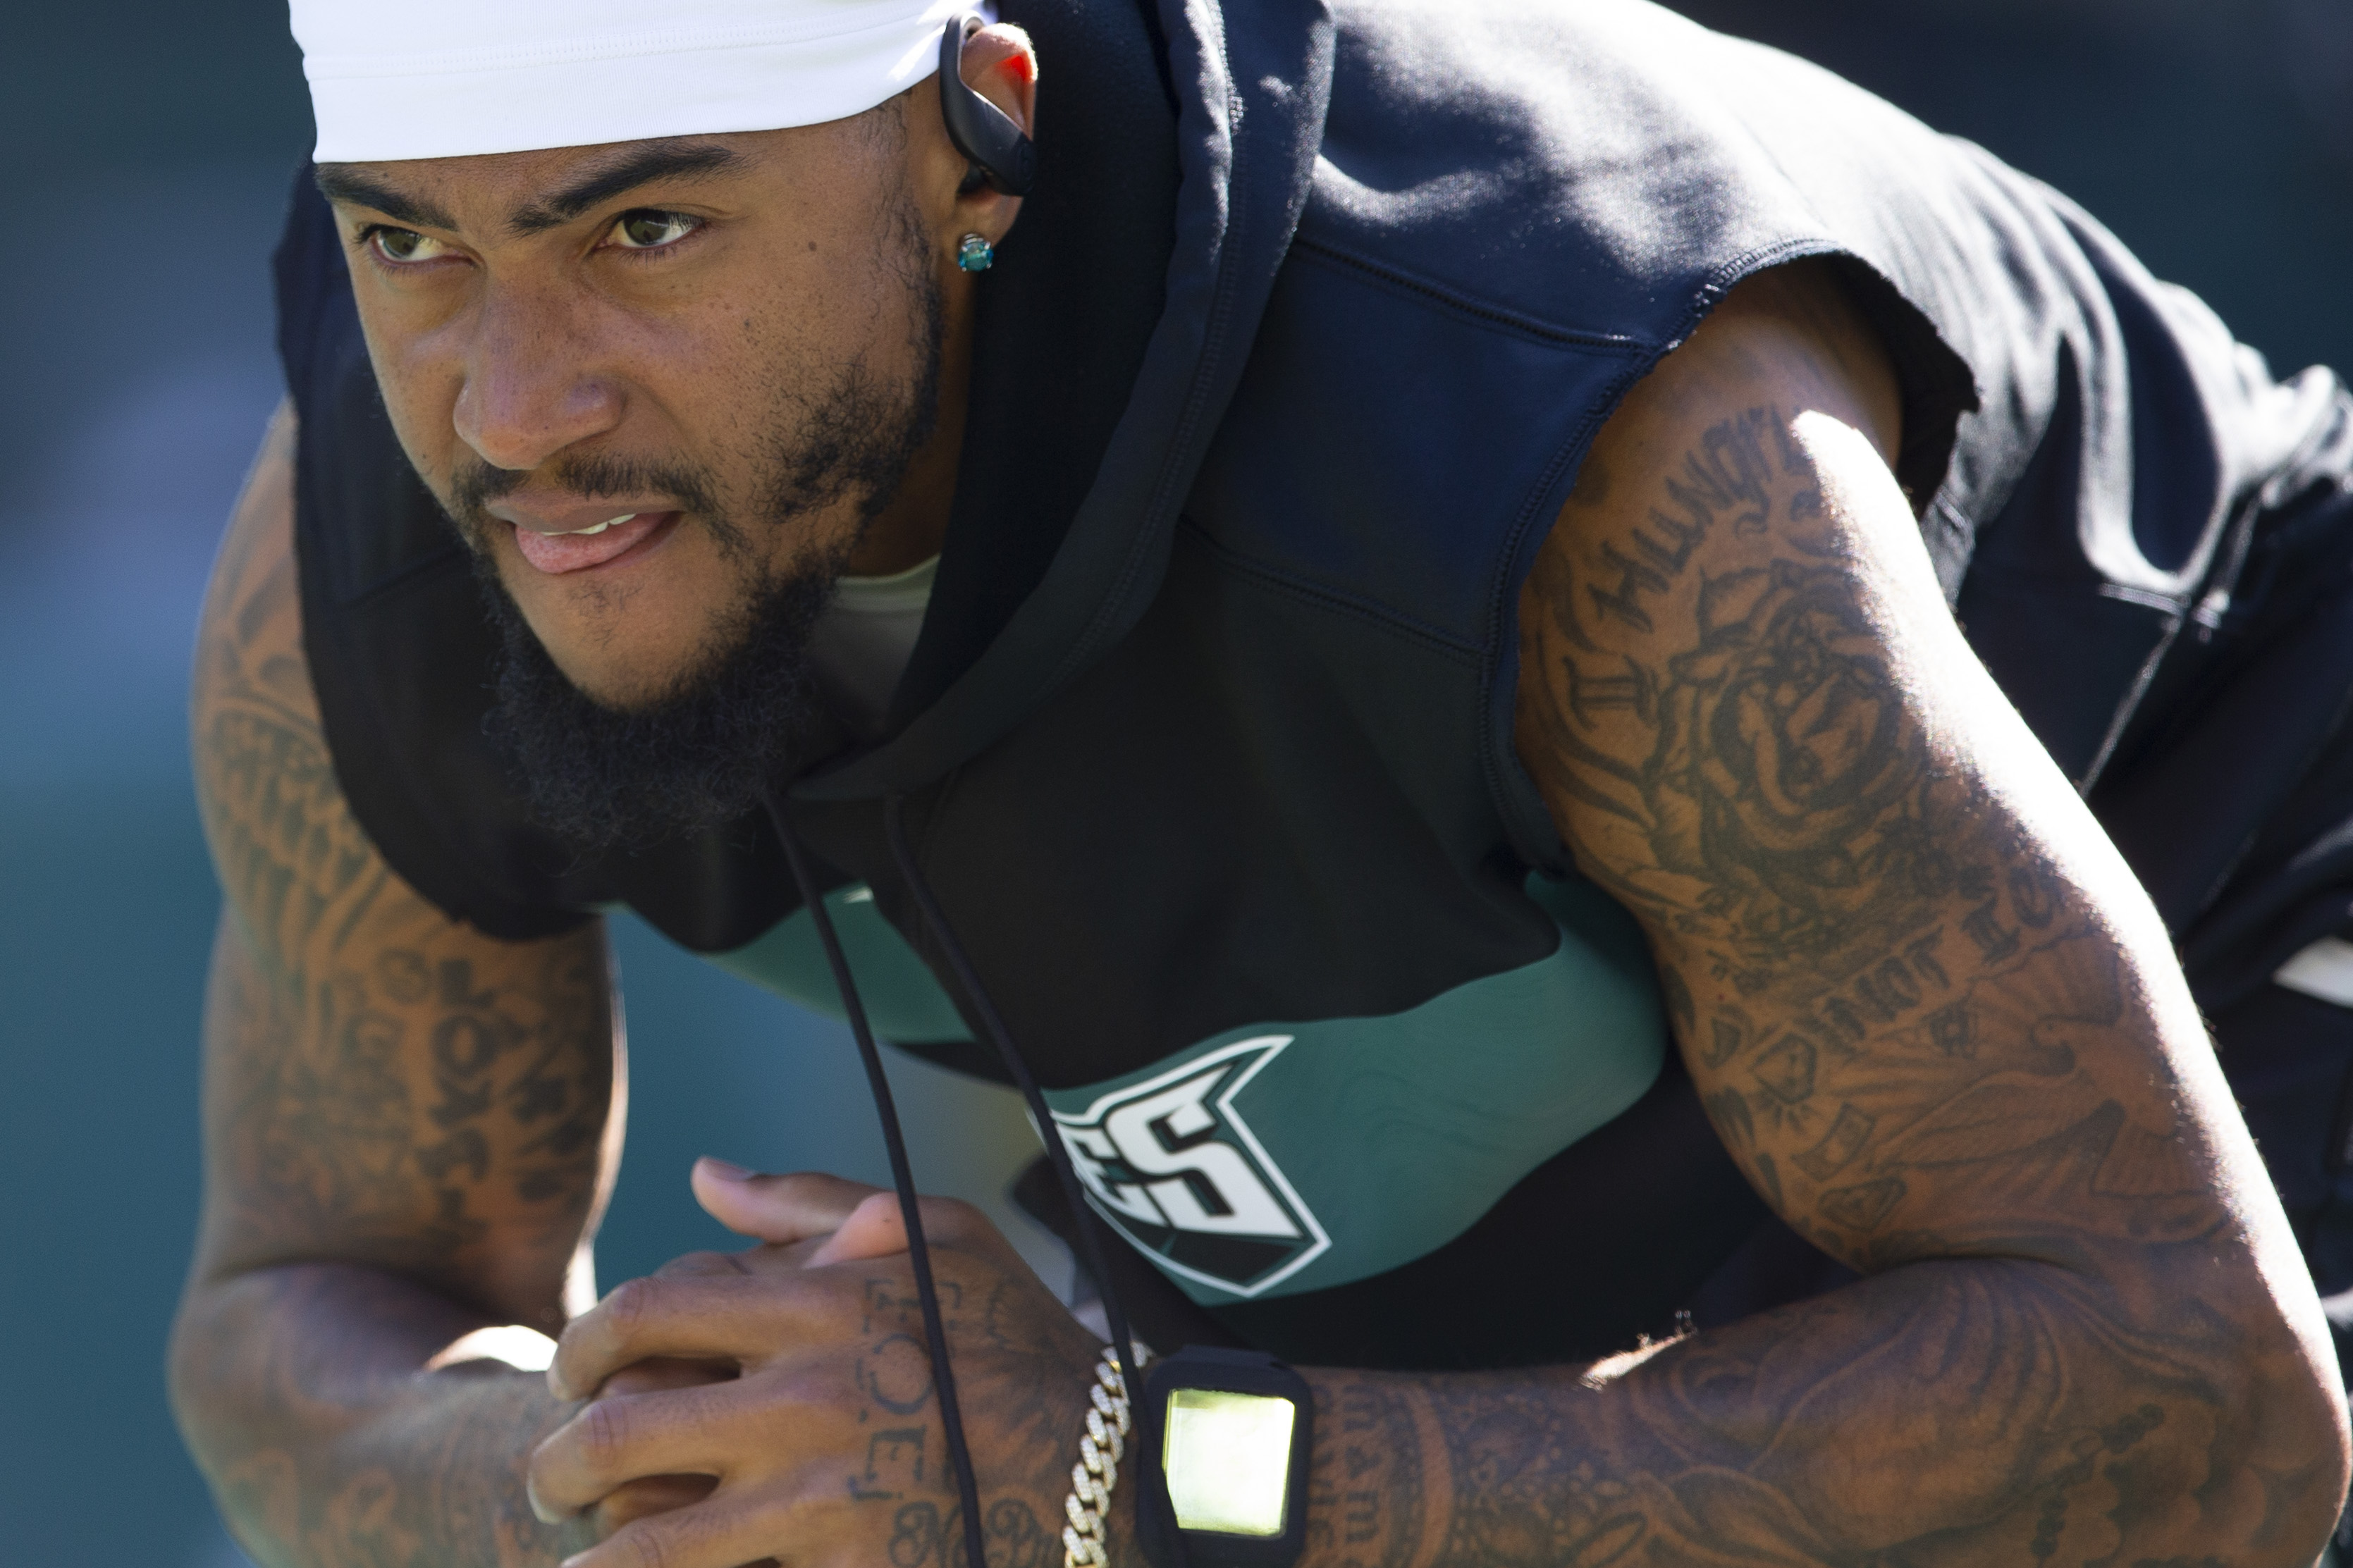 DeSean Jackson said there is no 'brotherhood' in the NFL.